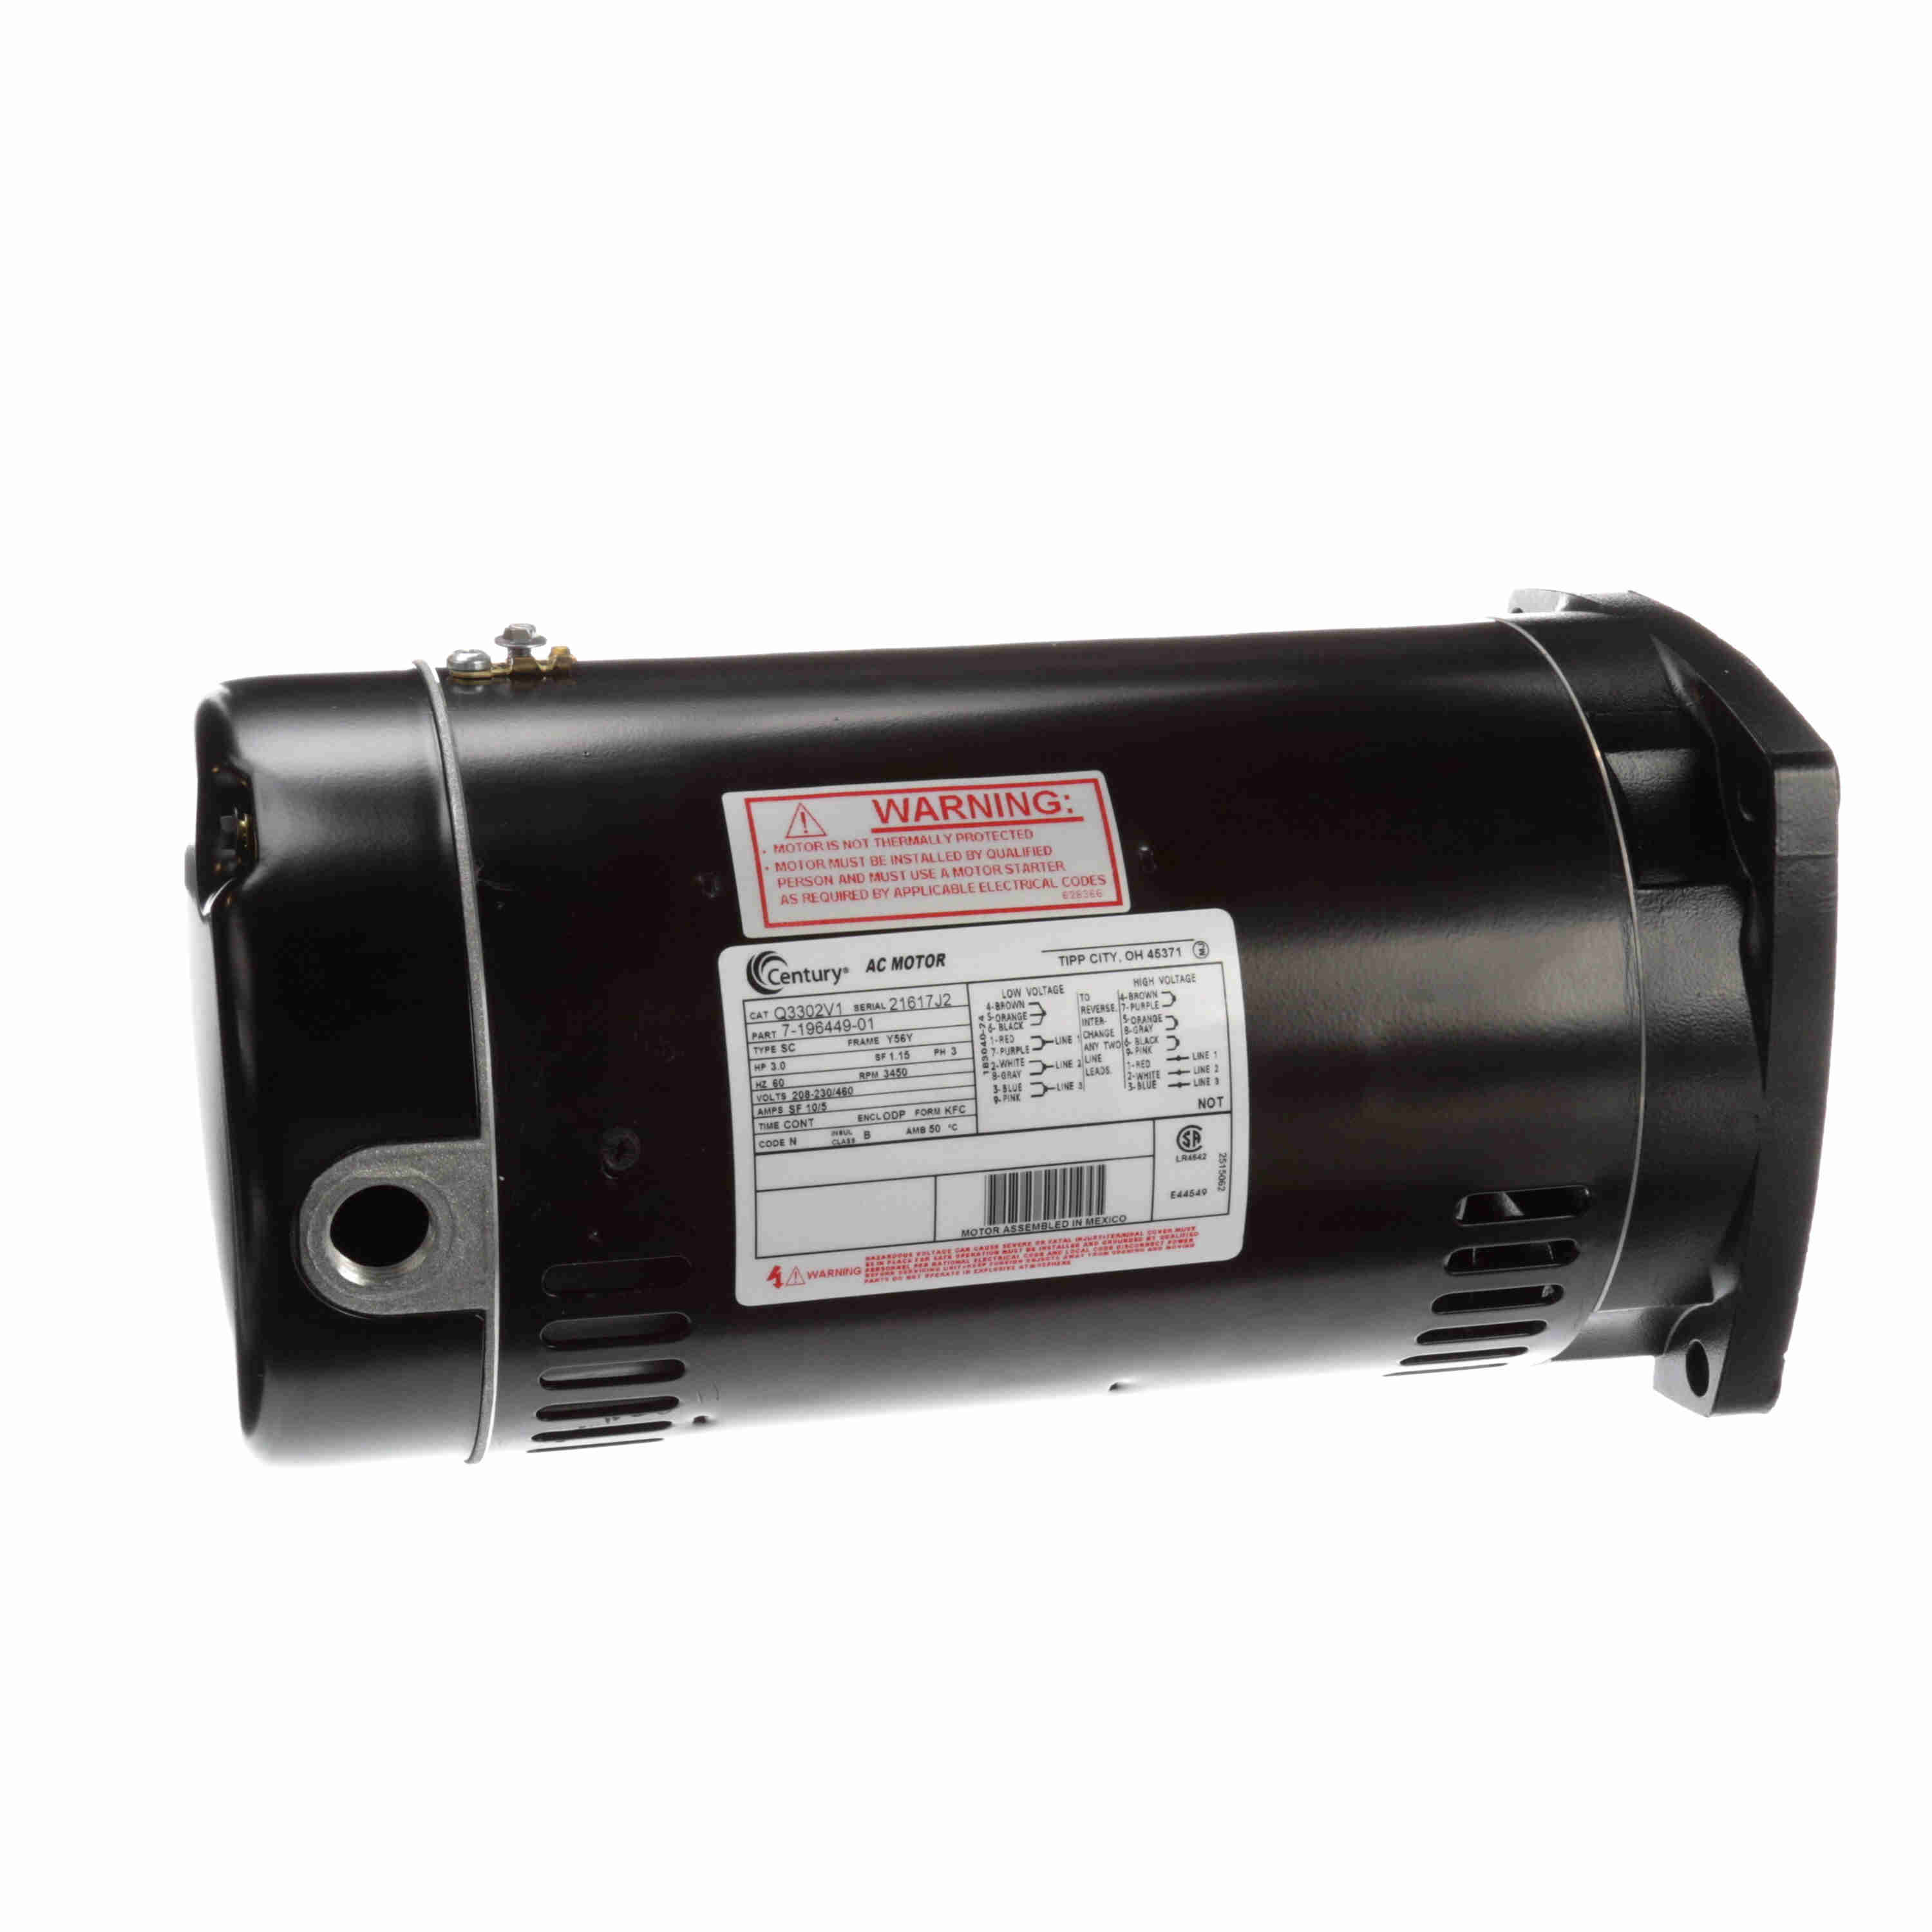 Century Q3302V1 Square Flange 3-Phase Full-Rated Pool and Spa Pump Motor; 3 HP, 3450 RPM, 208-230/460 V, 56Y, Threaded Shaft